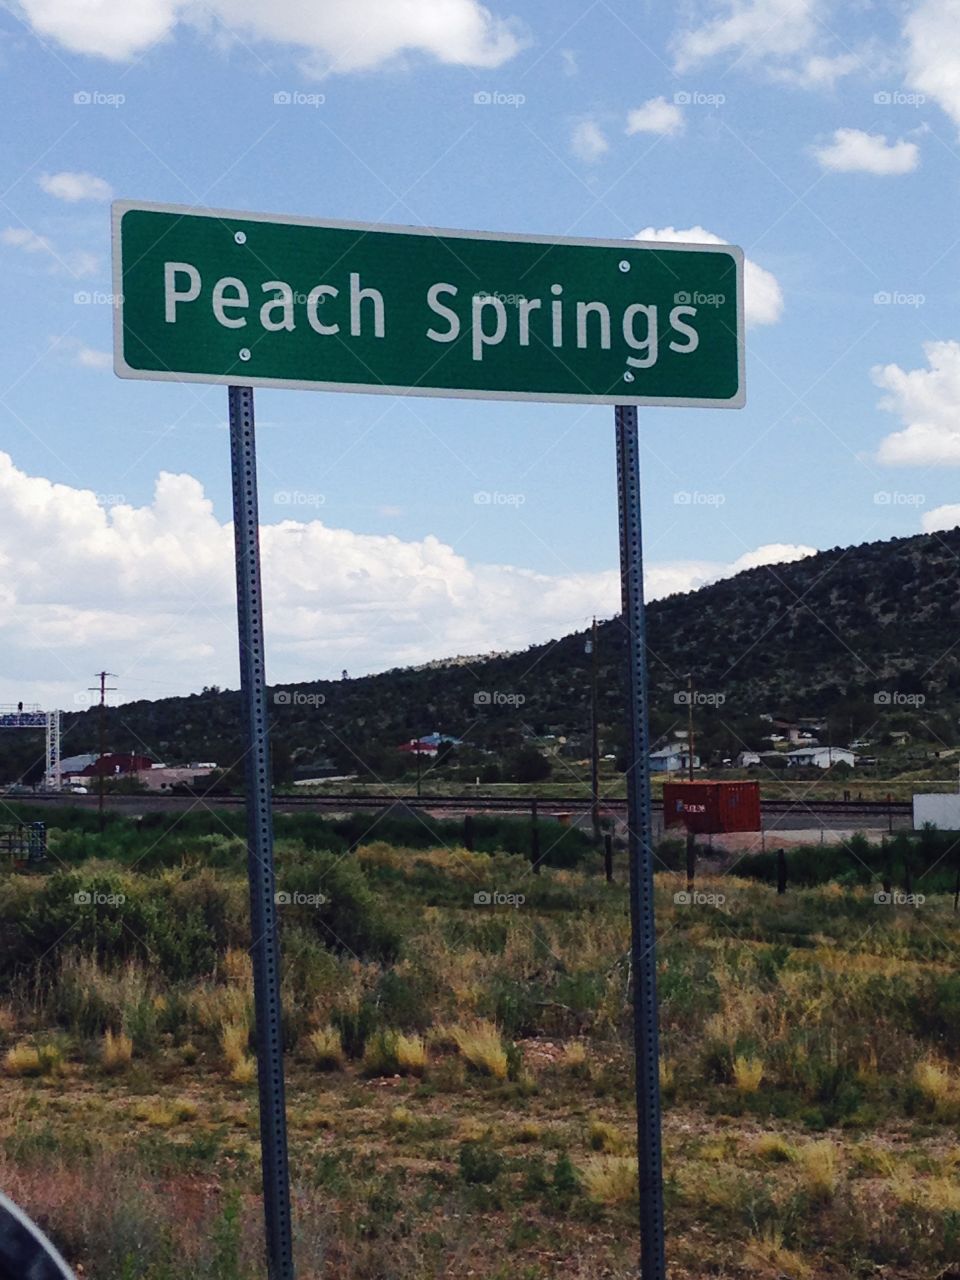 Peach Springs sign
The cars village